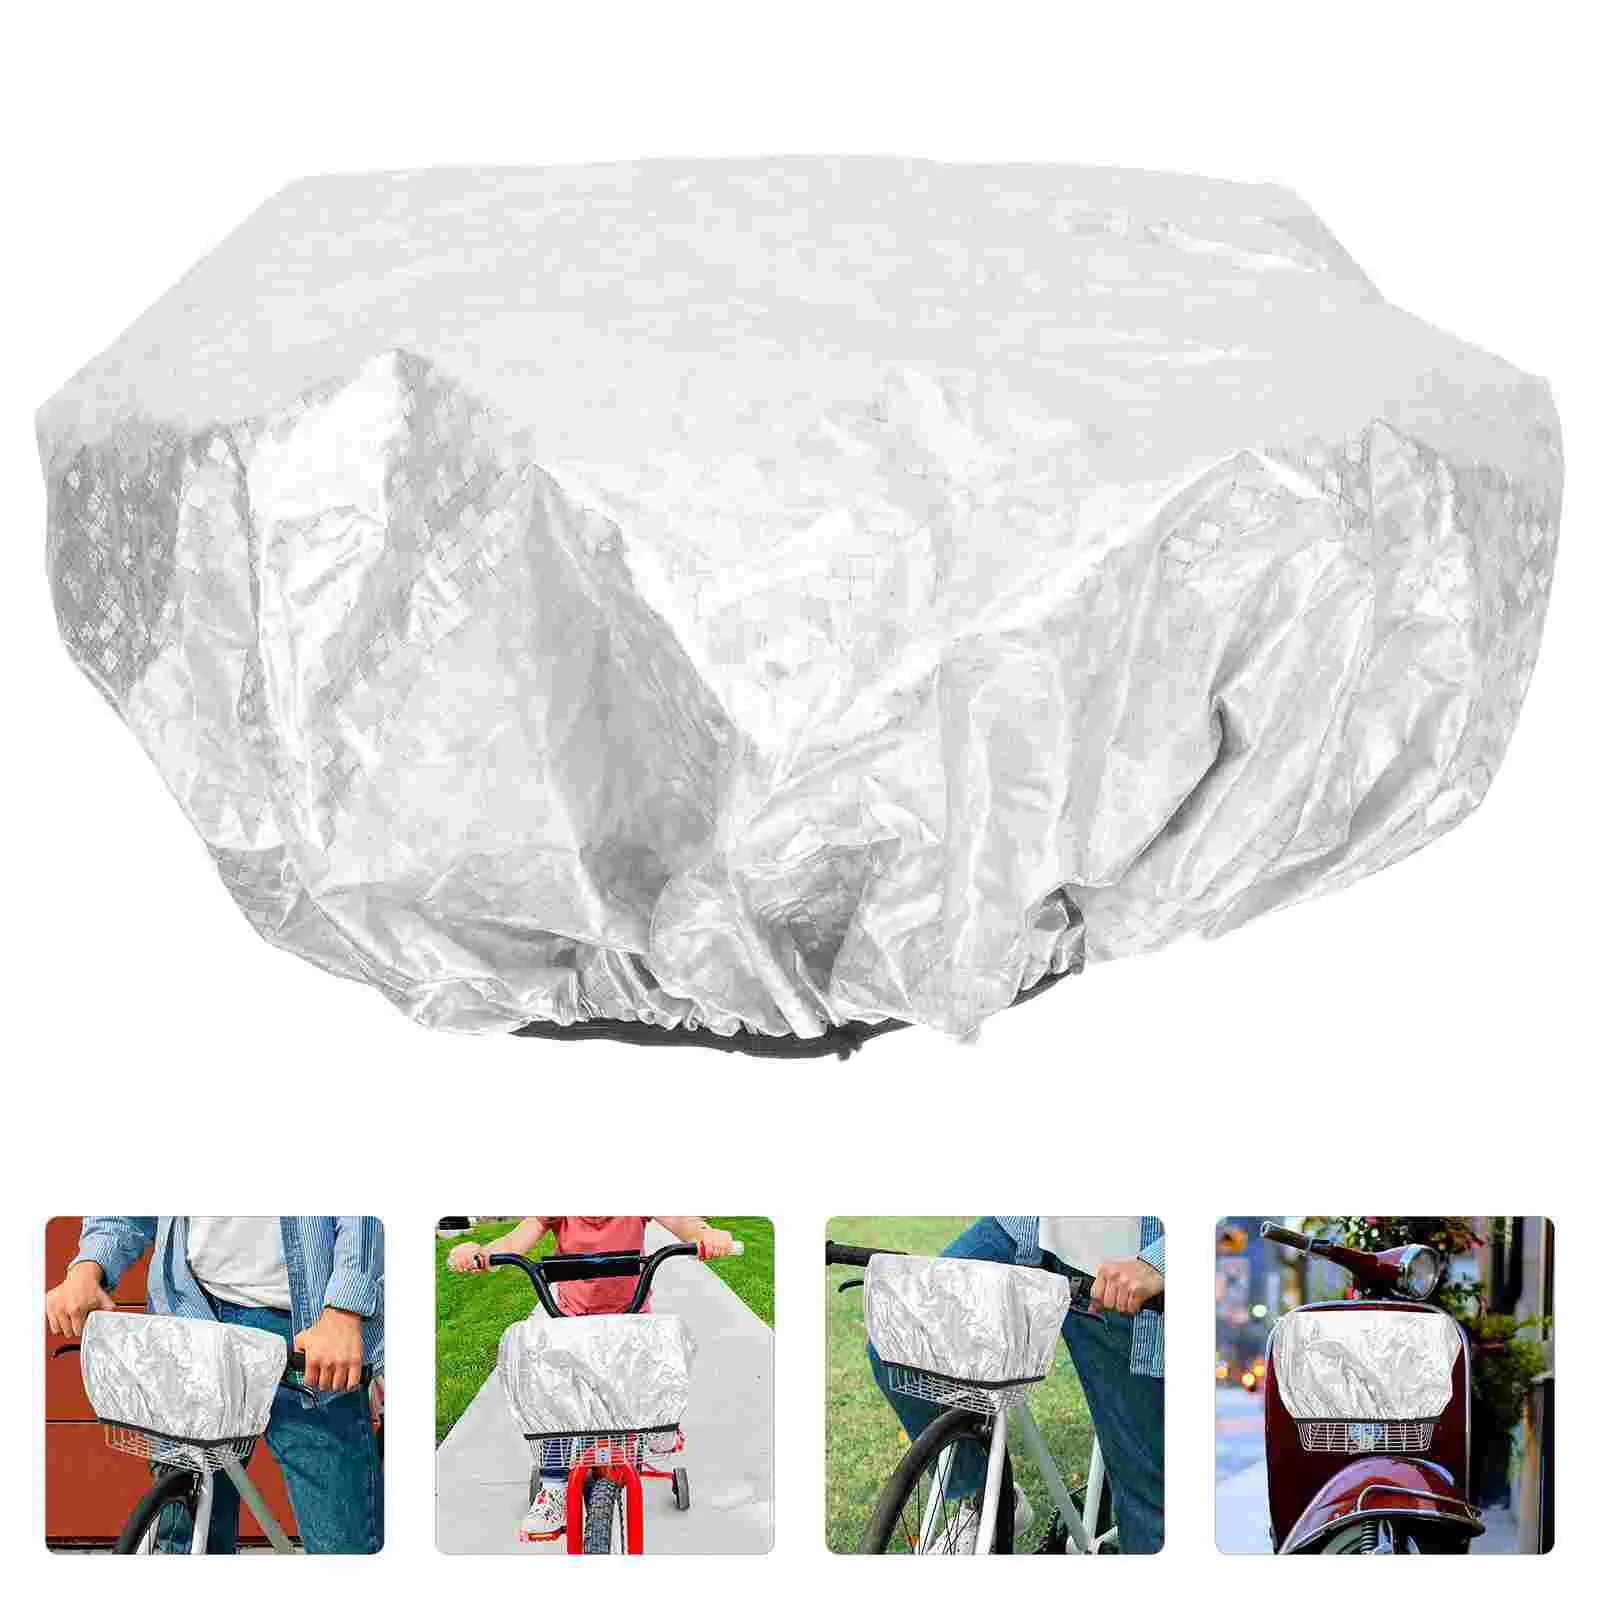 

Bicycle Basket Cover Waterproof Cycling Bike Sleeve Bicycles Rain Outdoor Practical Bikes Electric Accessories